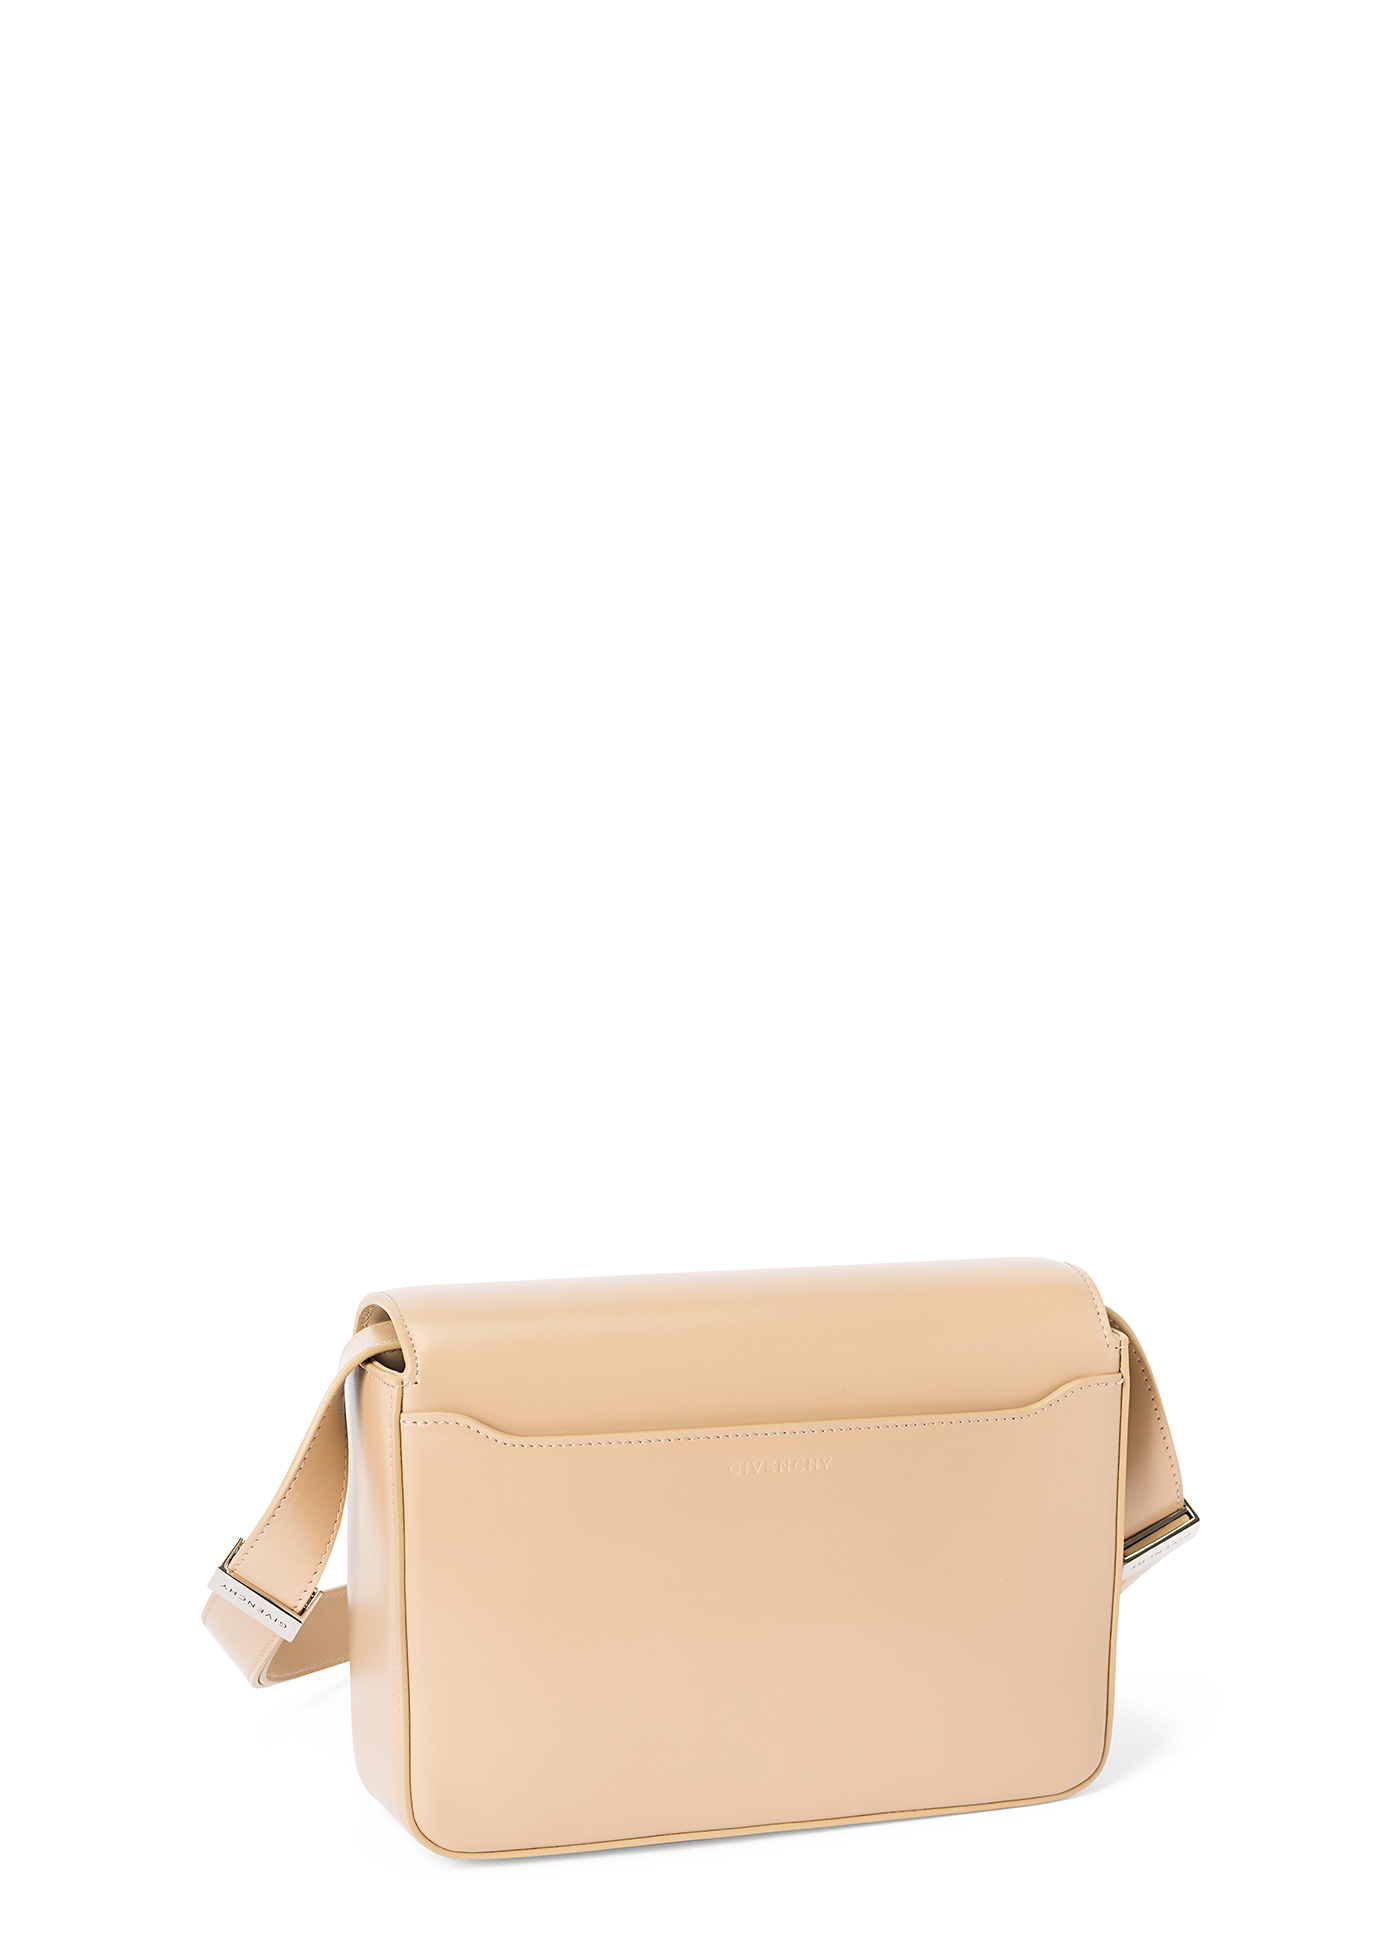 4G - SMALL CROSSBODY BAG image number 1